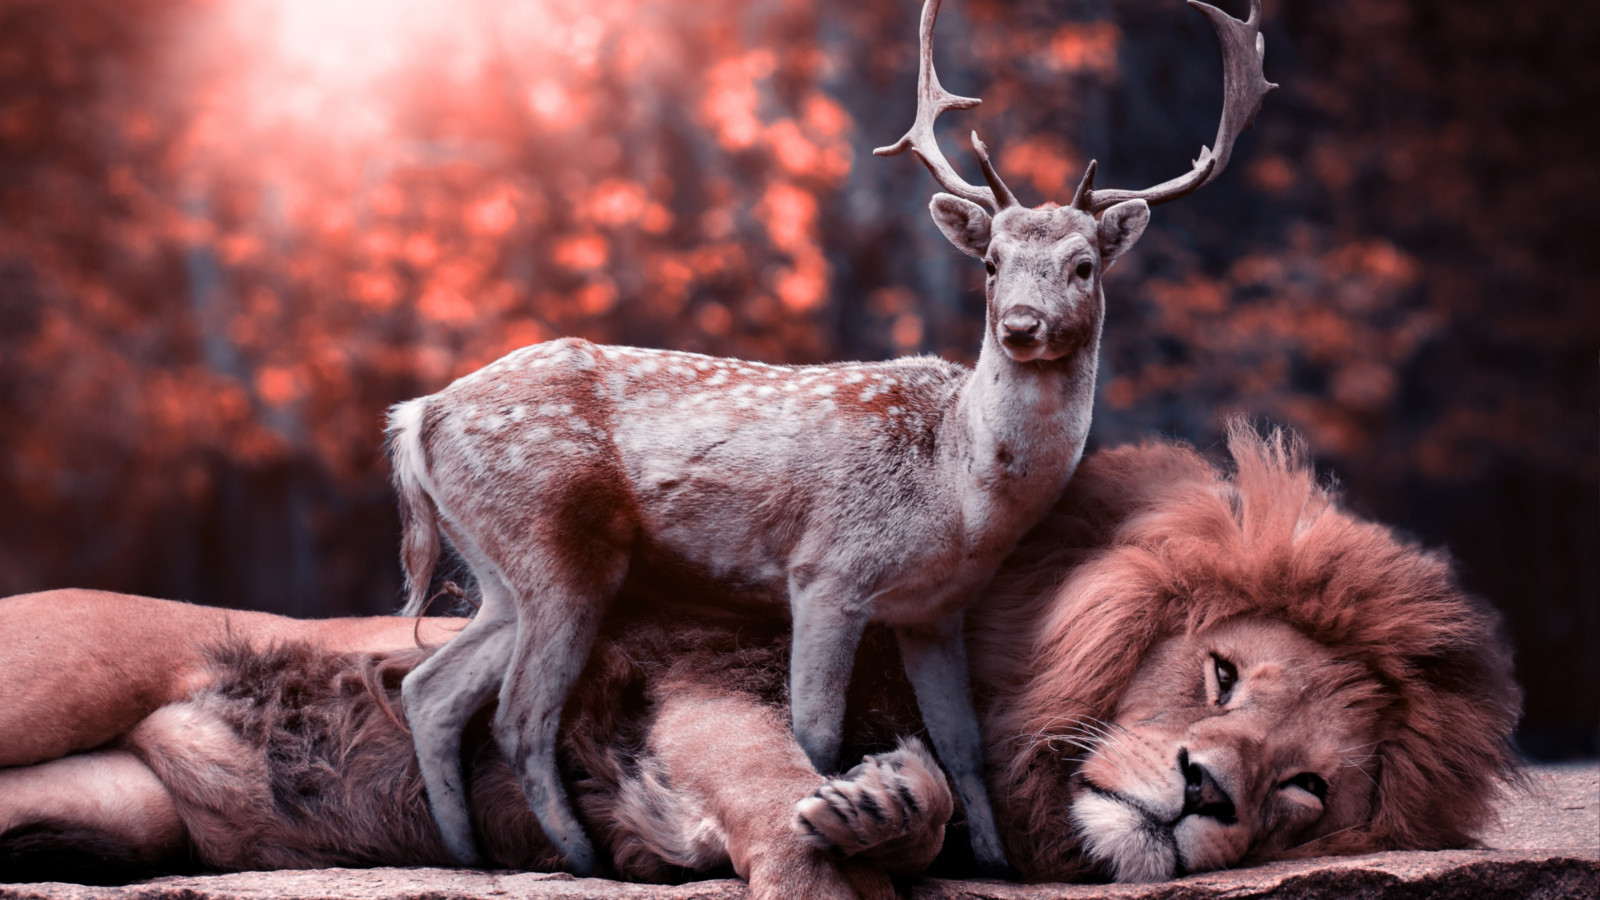 The lion and the deer wallpaper 1600x900